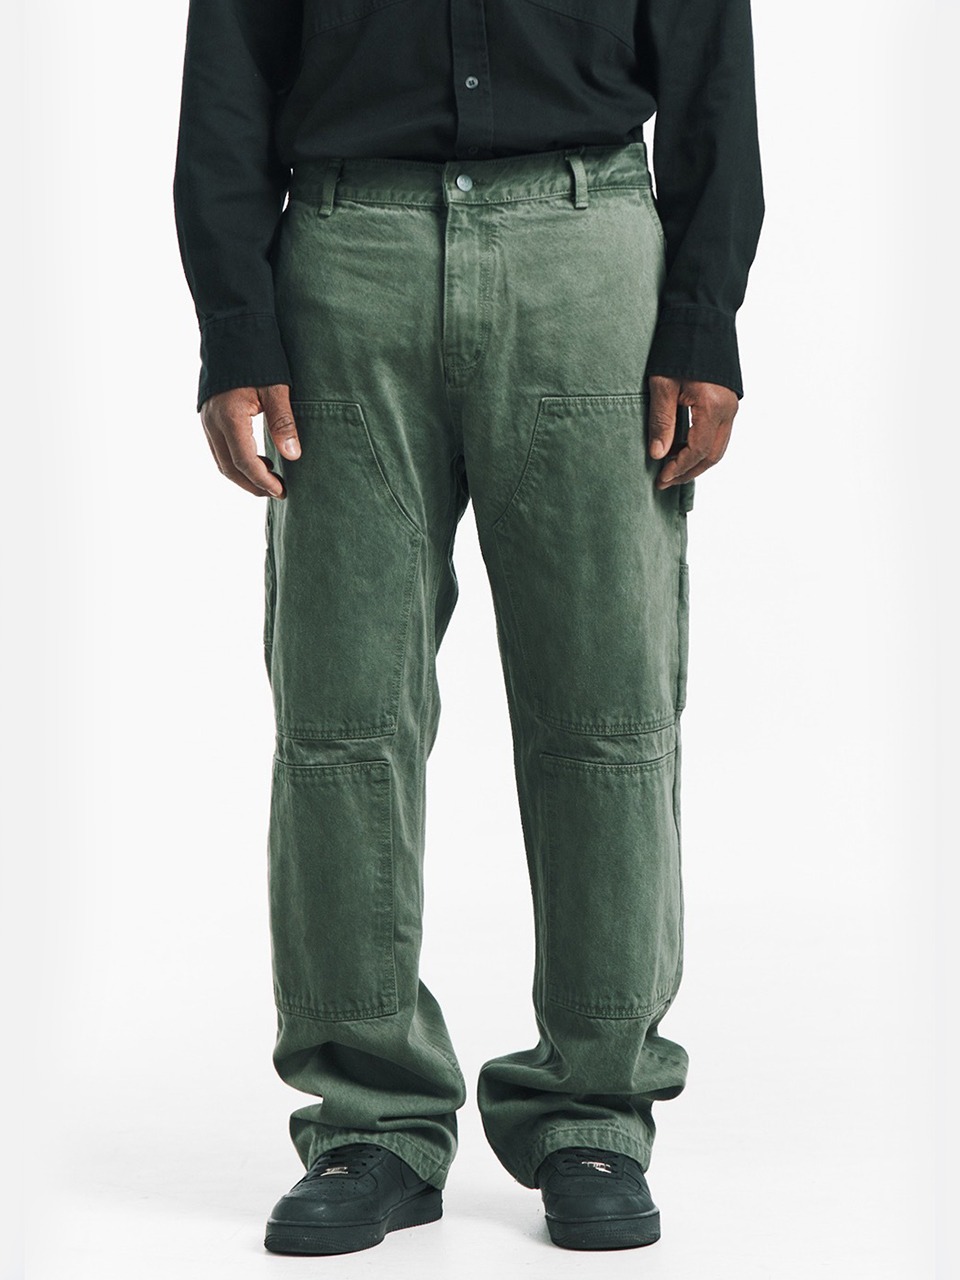 PLASTICPRODUCT - MPa DOUBLE KNEE PANTS (OLIVE)